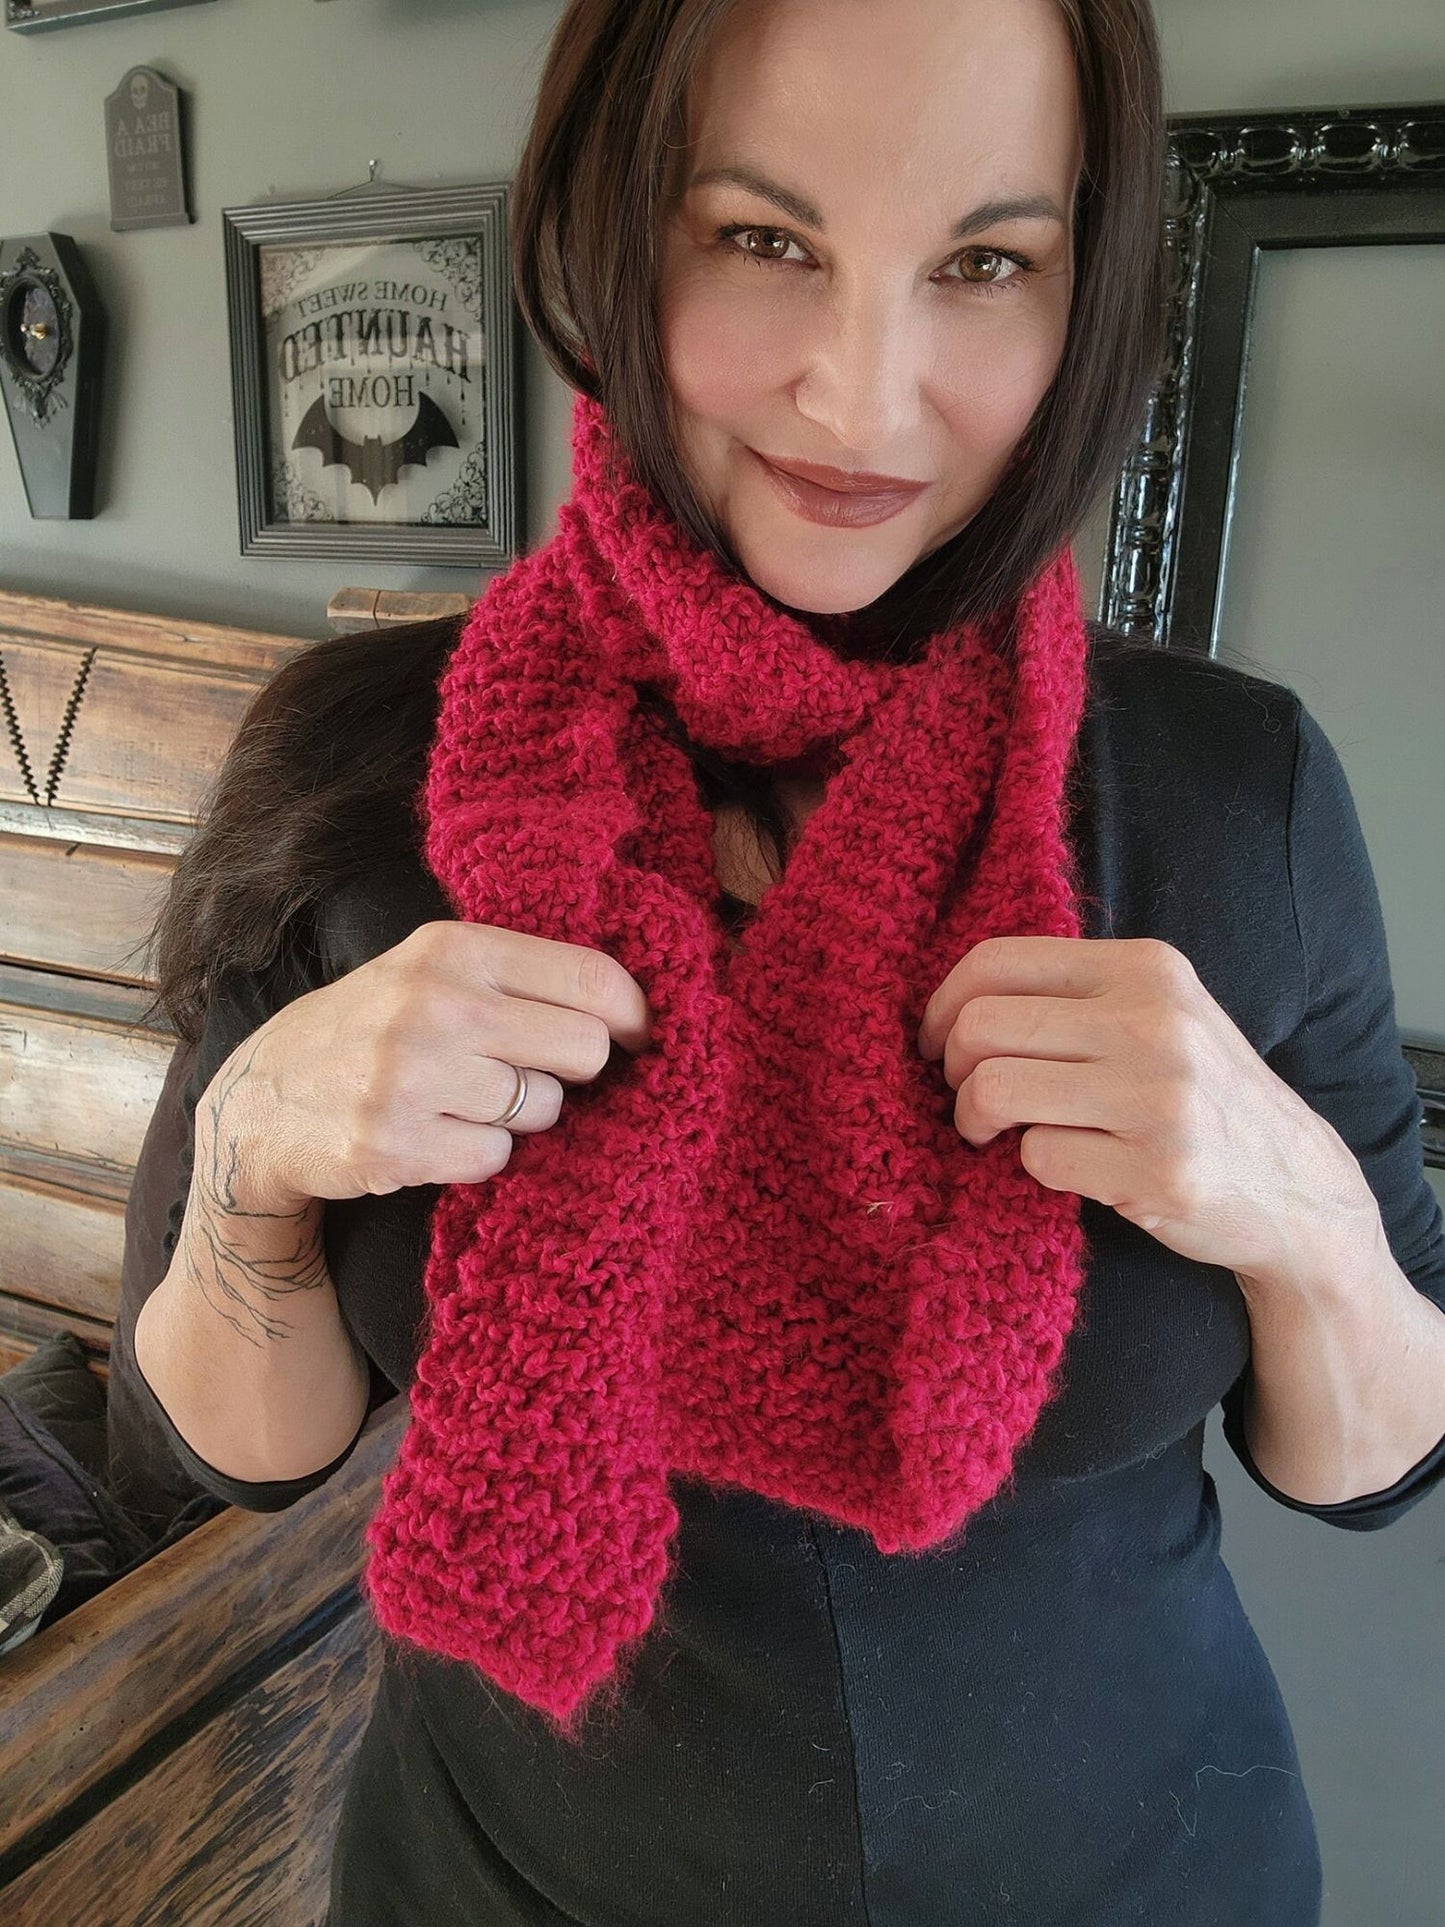 The "Crimson" Knit Scarf in a Chunky Red Boucle Yarn